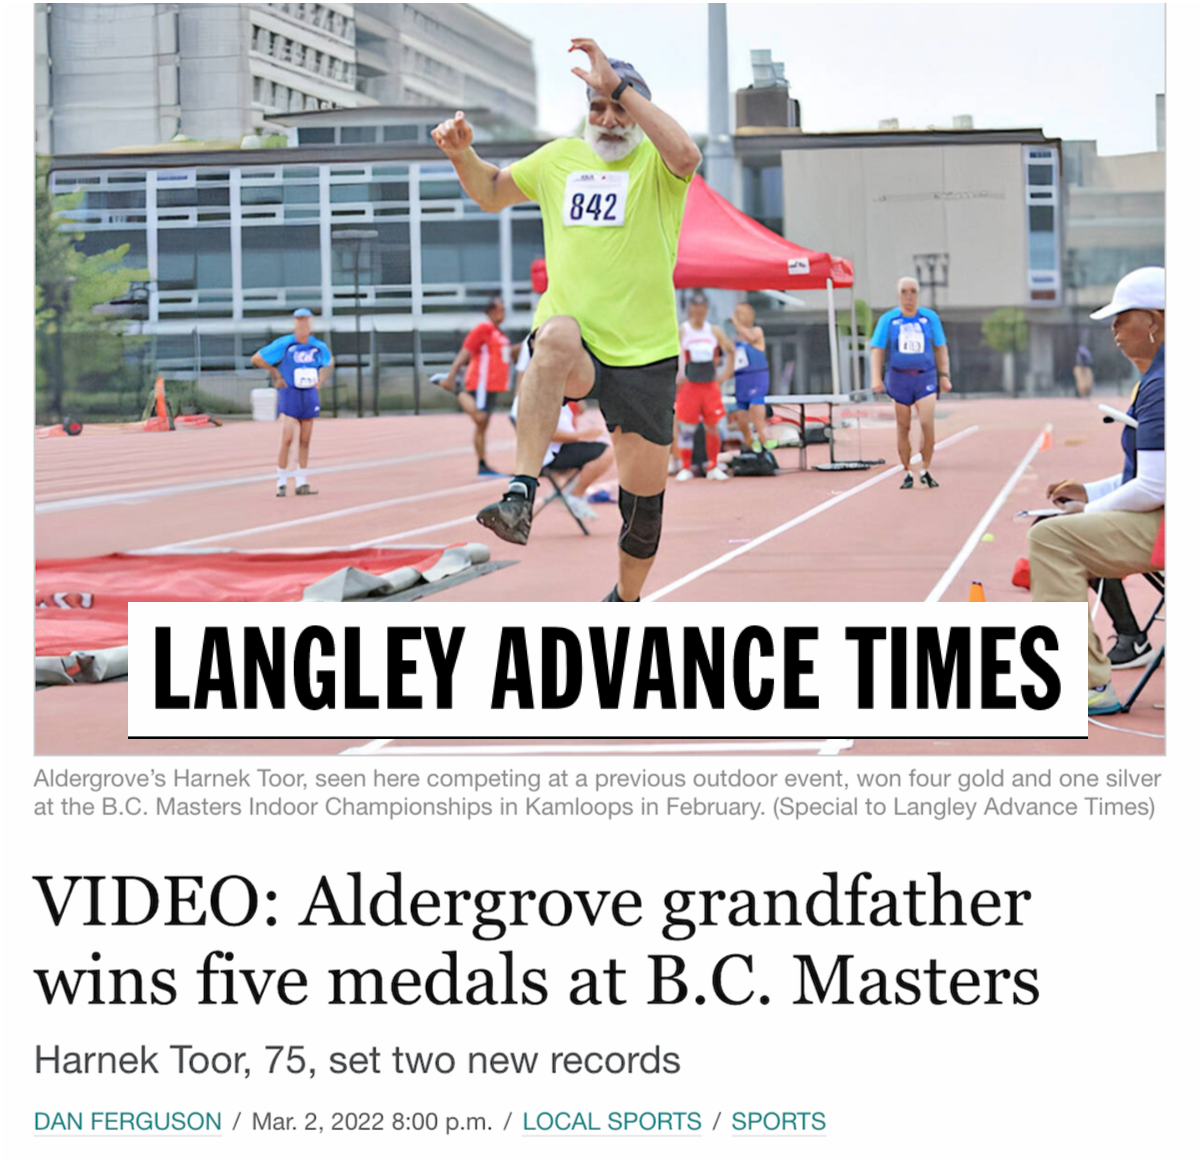 NHL honours Aldergrove athlete and grandmother's 'fight' against cancer in  special match - Langley Advance Times